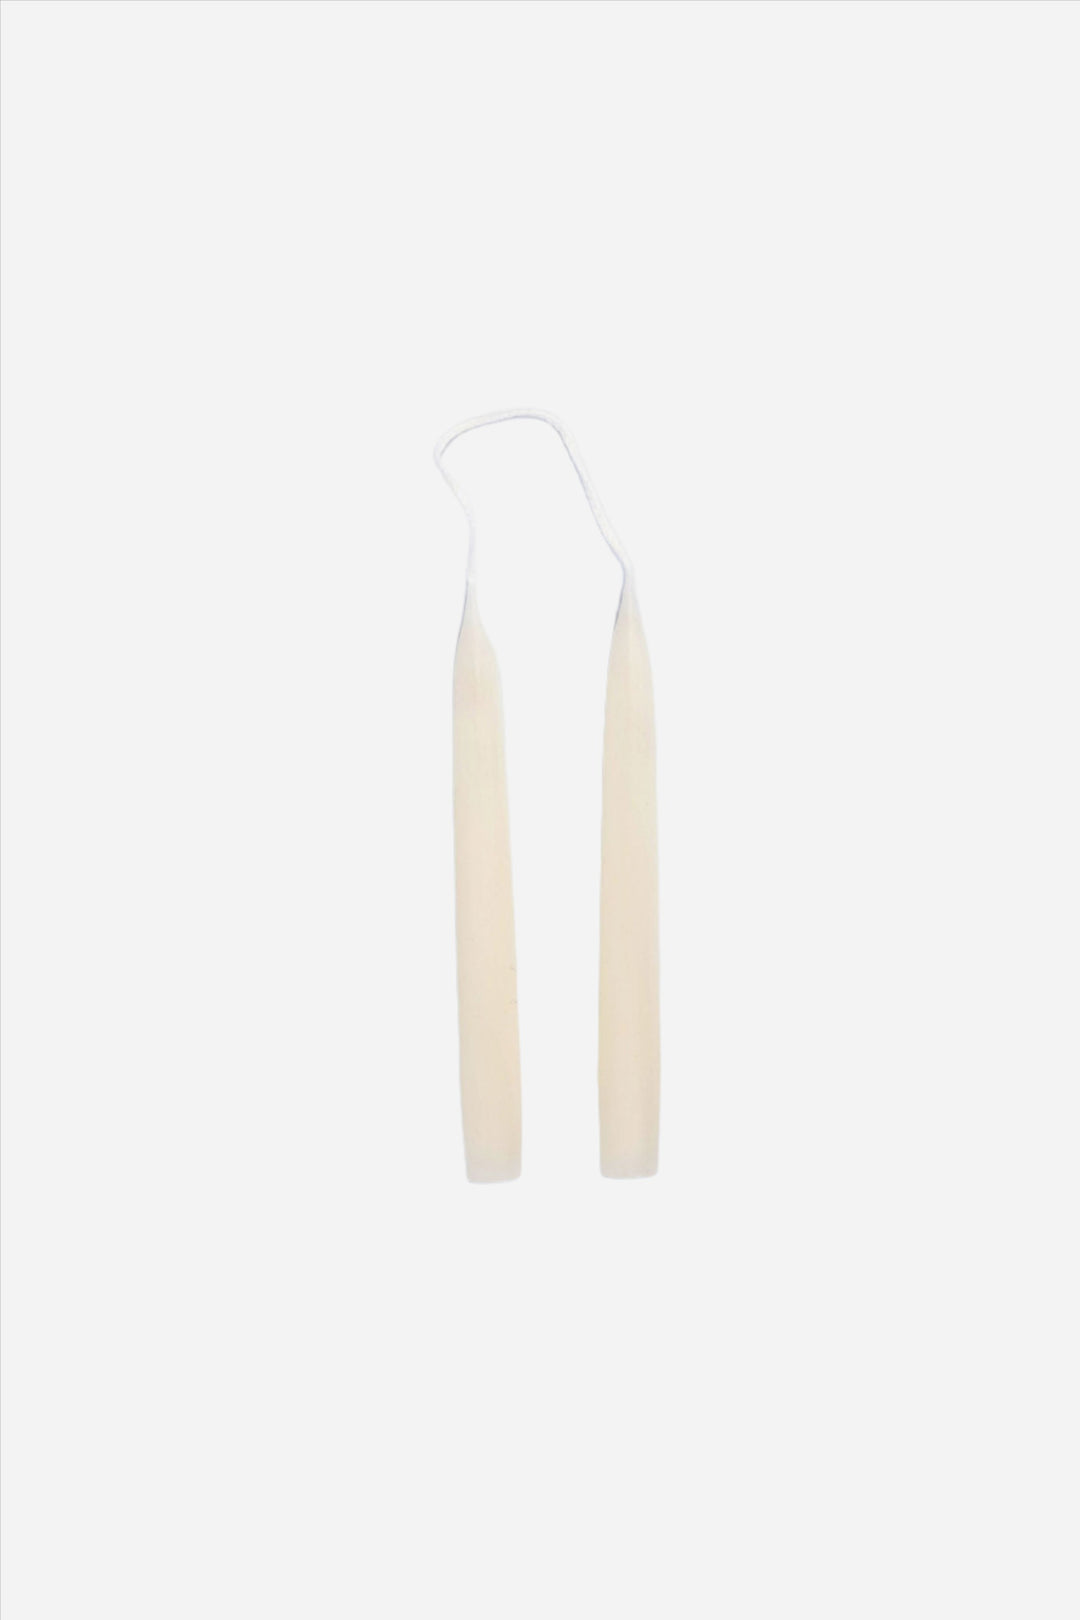 Small Pair of Candles / Off White